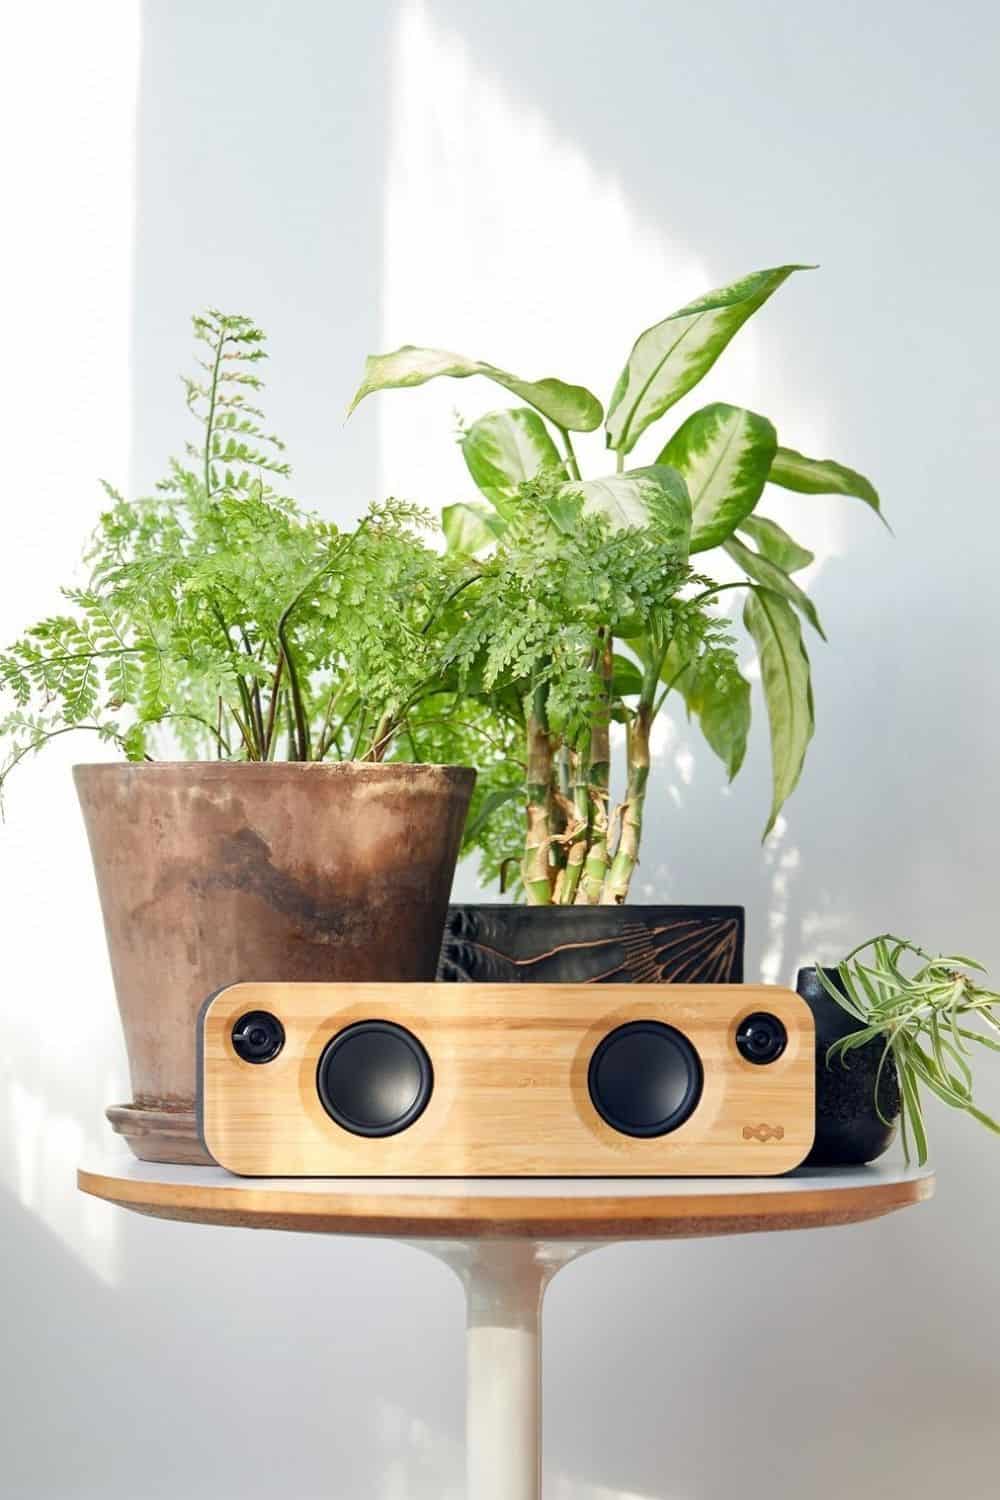 Unlike fashion, finding solutions to the environmental and ethical issues in the technology industry hasn’t been as, well, fashionable. So, what can we do as a consumer looking for ethical electronics? Image by House of Marley #ethicalelectronics #ecofriendlyelectronics #sustainablejungle